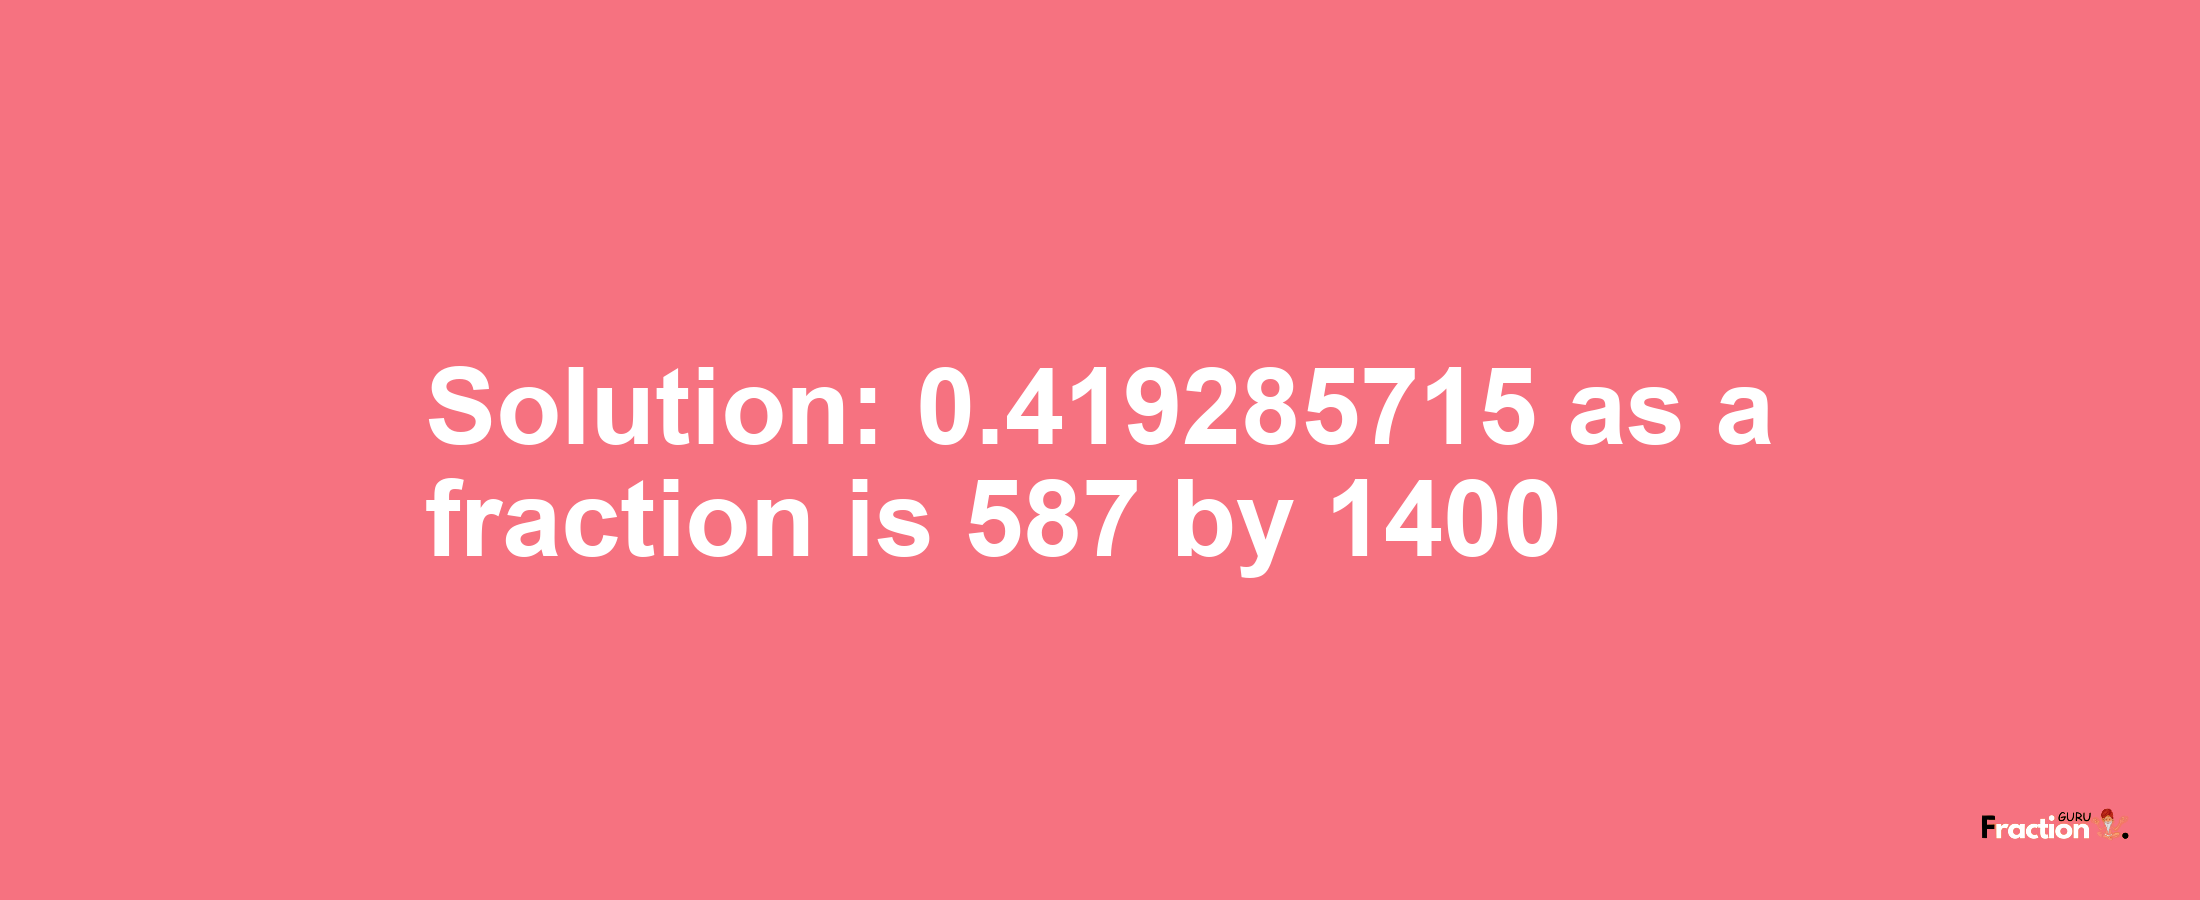 Solution:0.419285715 as a fraction is 587/1400